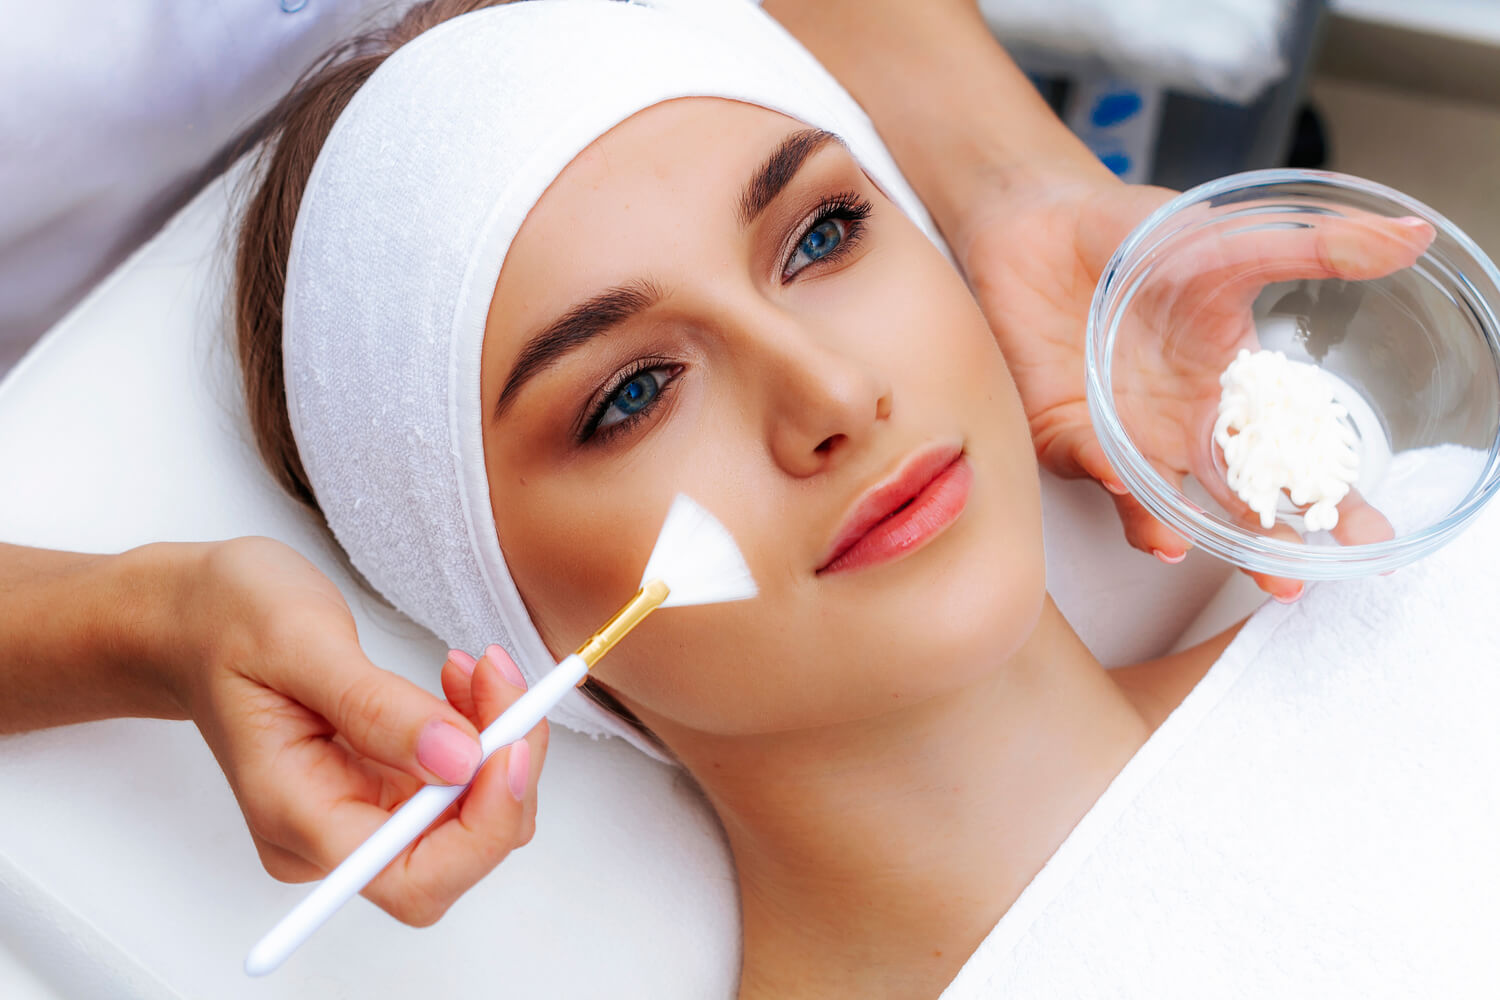 Are chemical peels safe during pregnancy